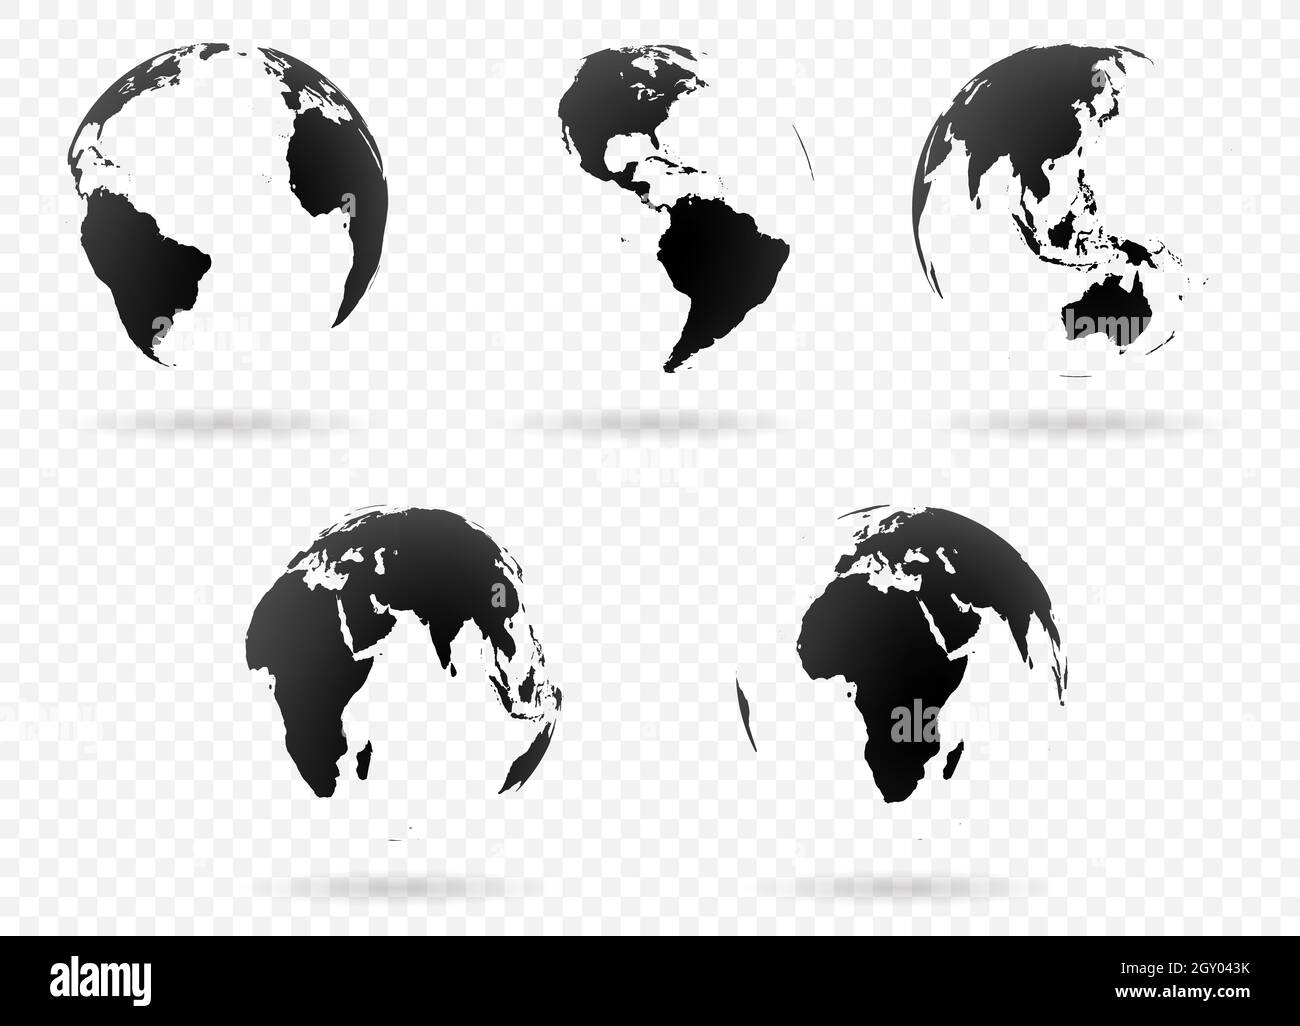 Set of Earth globe icon in different views. Highly detailed images of continents with transparent parts. Vector illustration Stock Photo